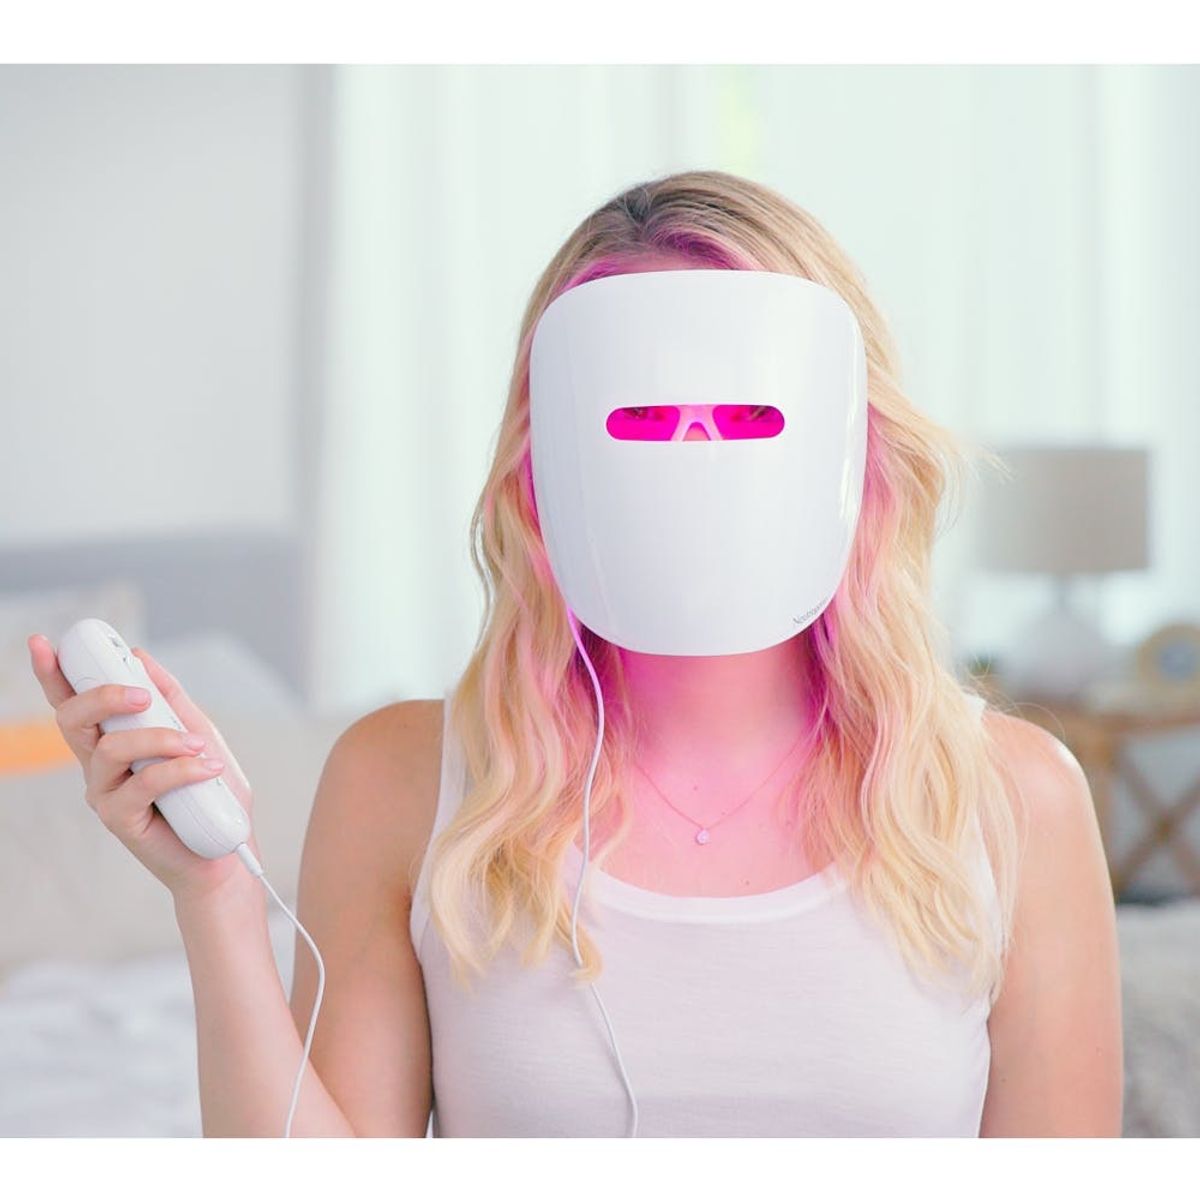 Why You Need to Buy Lena Dunham’s Out-There Acne Mask